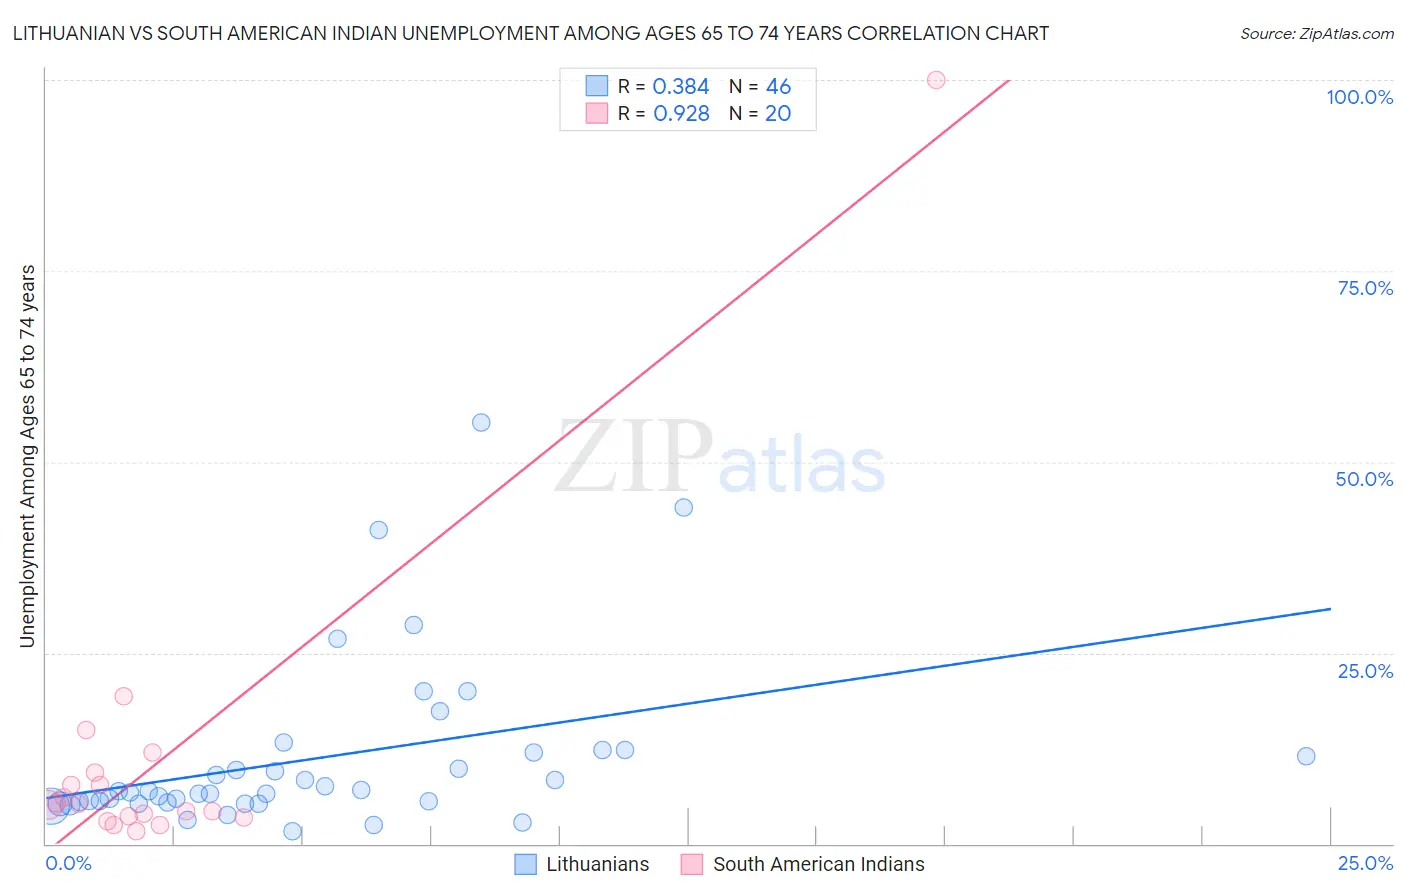 Lithuanian vs South American Indian Unemployment Among Ages 65 to 74 years